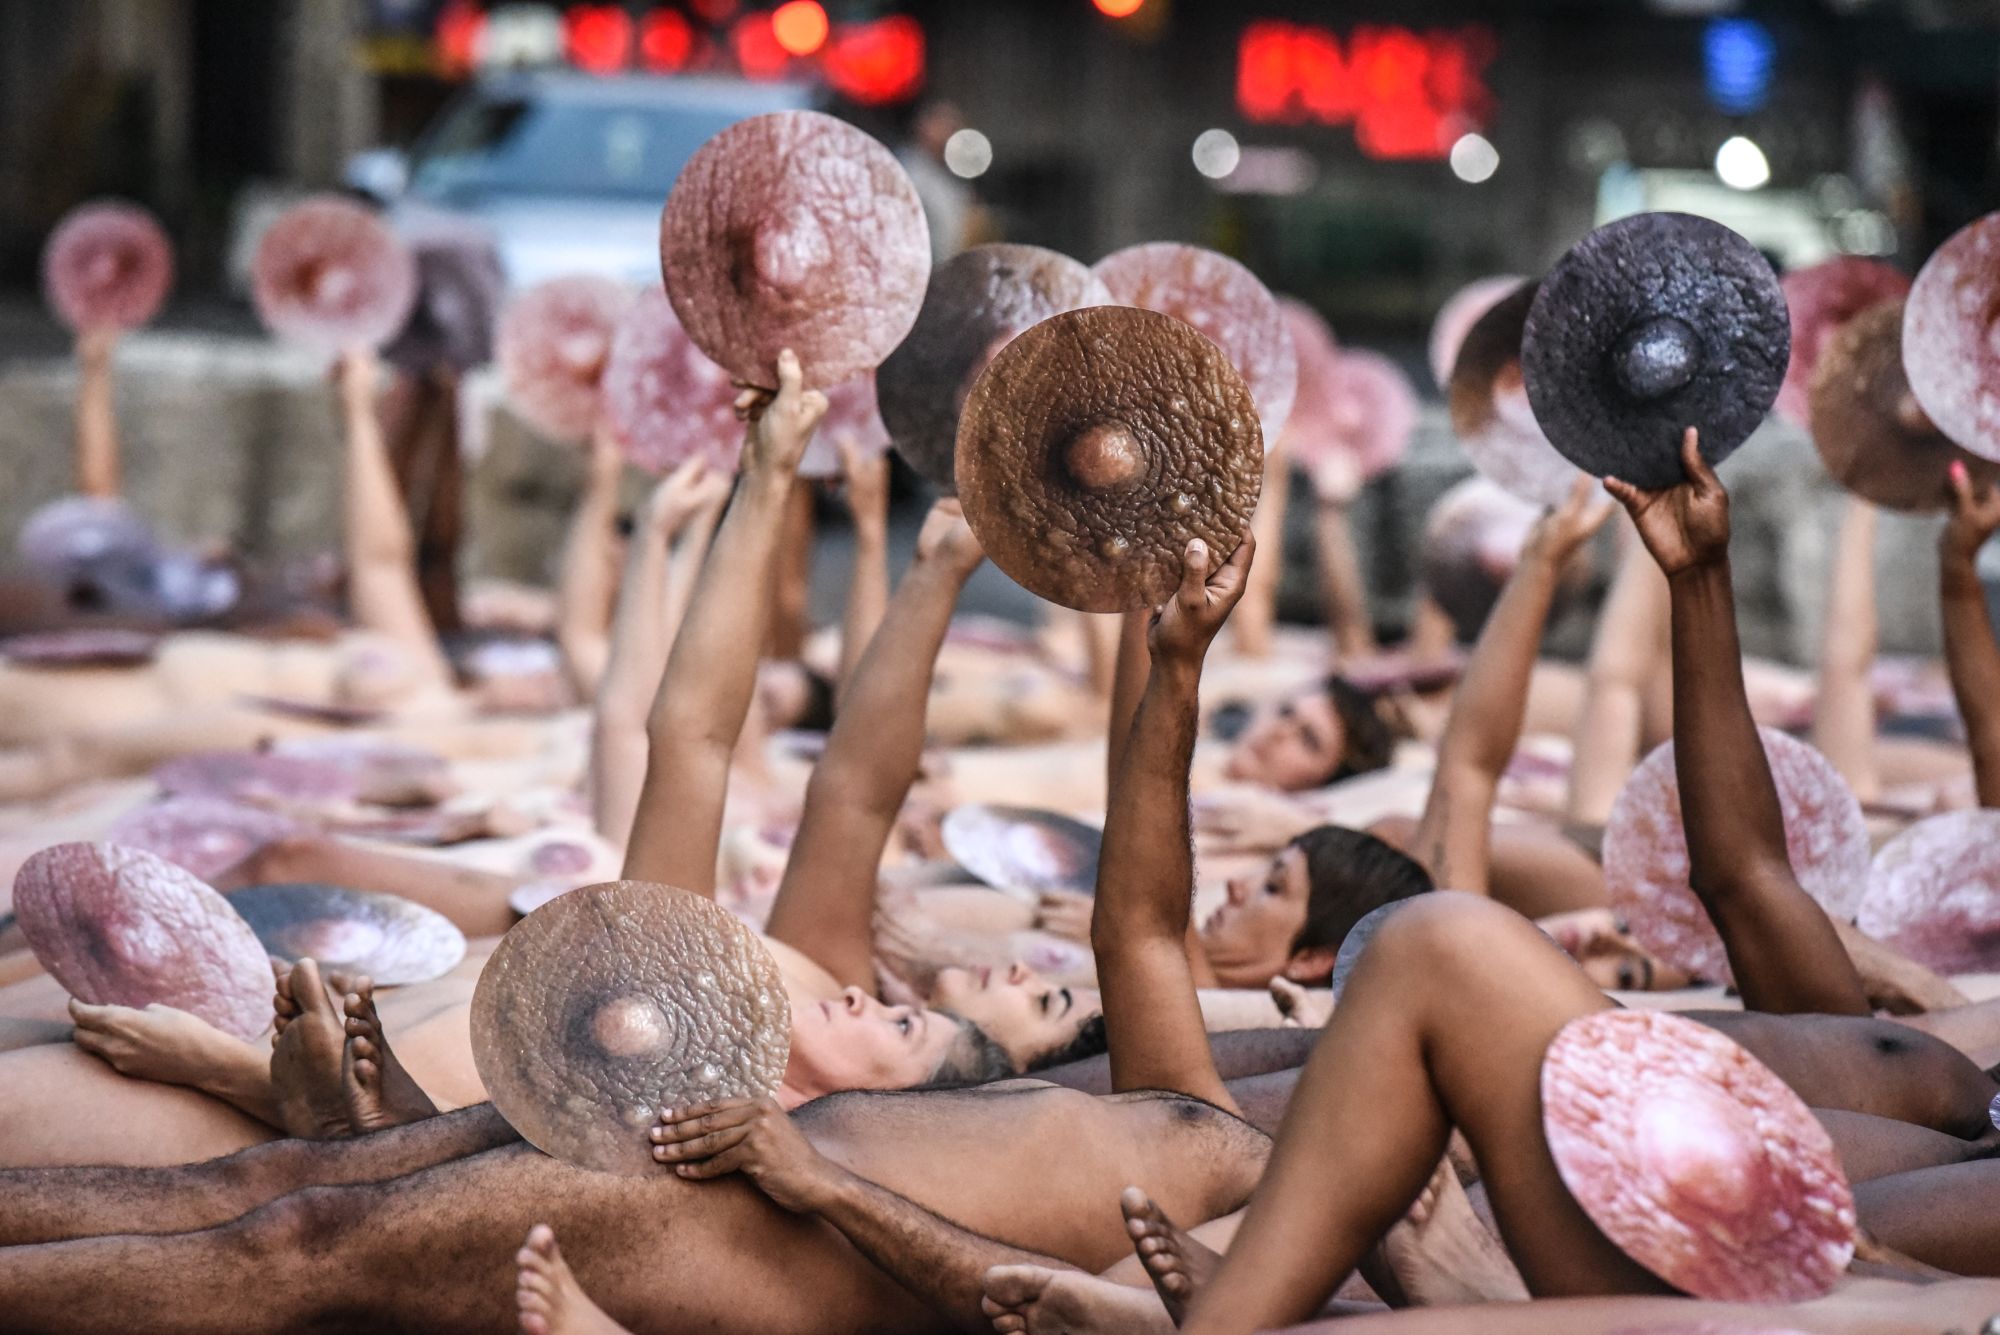 Demonstrators, photographed by Spencer Tunick, bare nipples